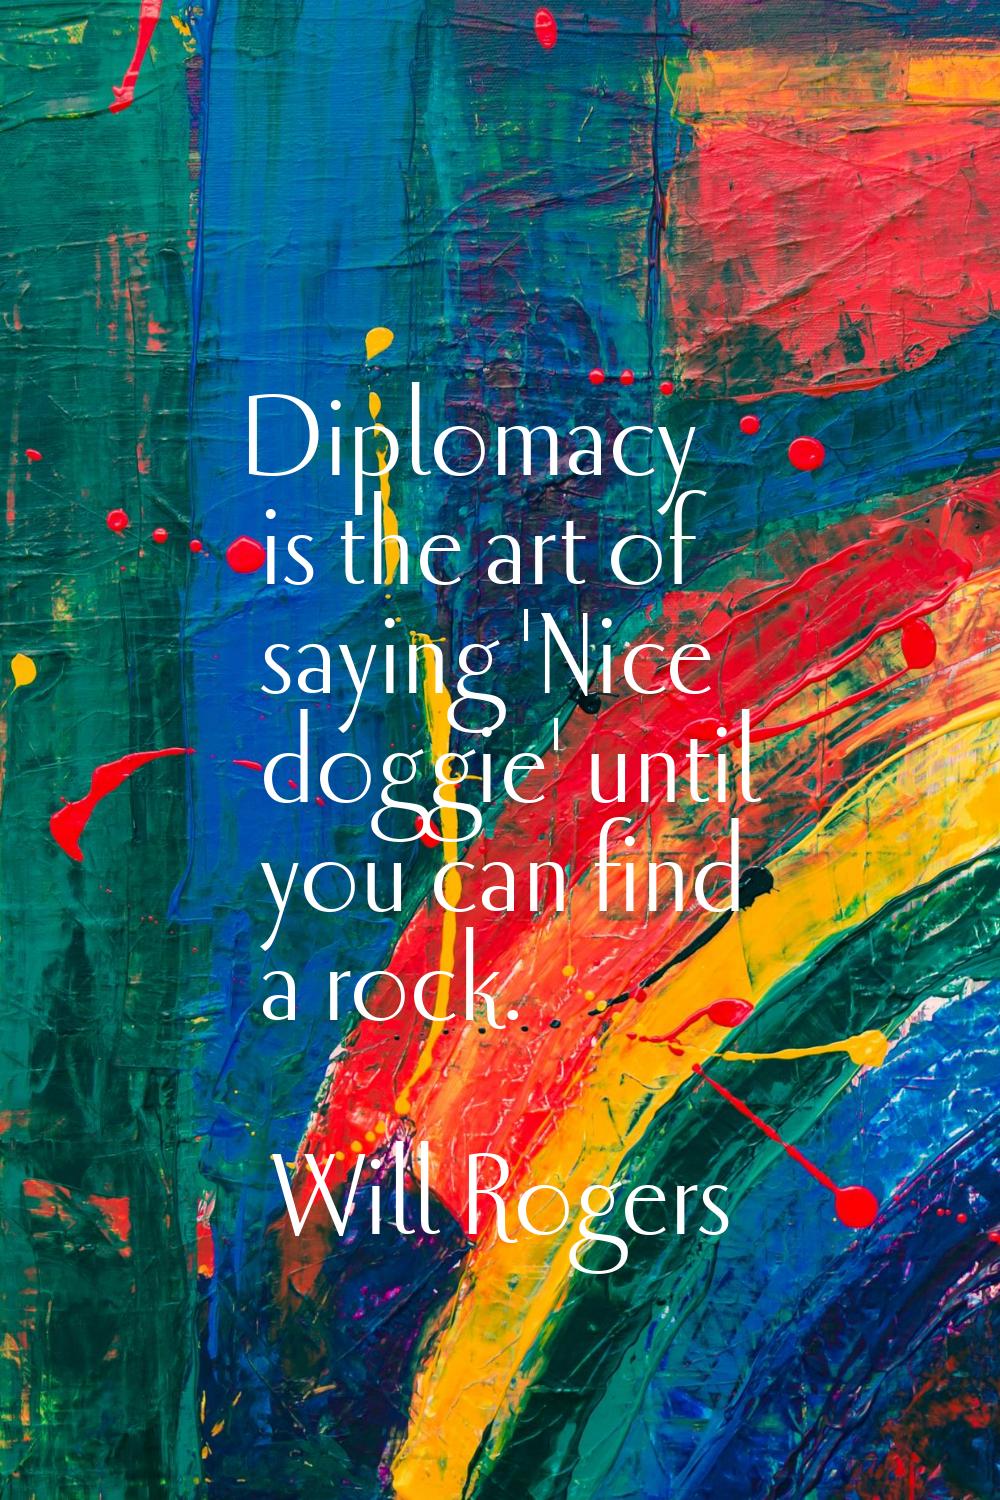 Diplomacy is the art of saying 'Nice doggie' until you can find a rock.